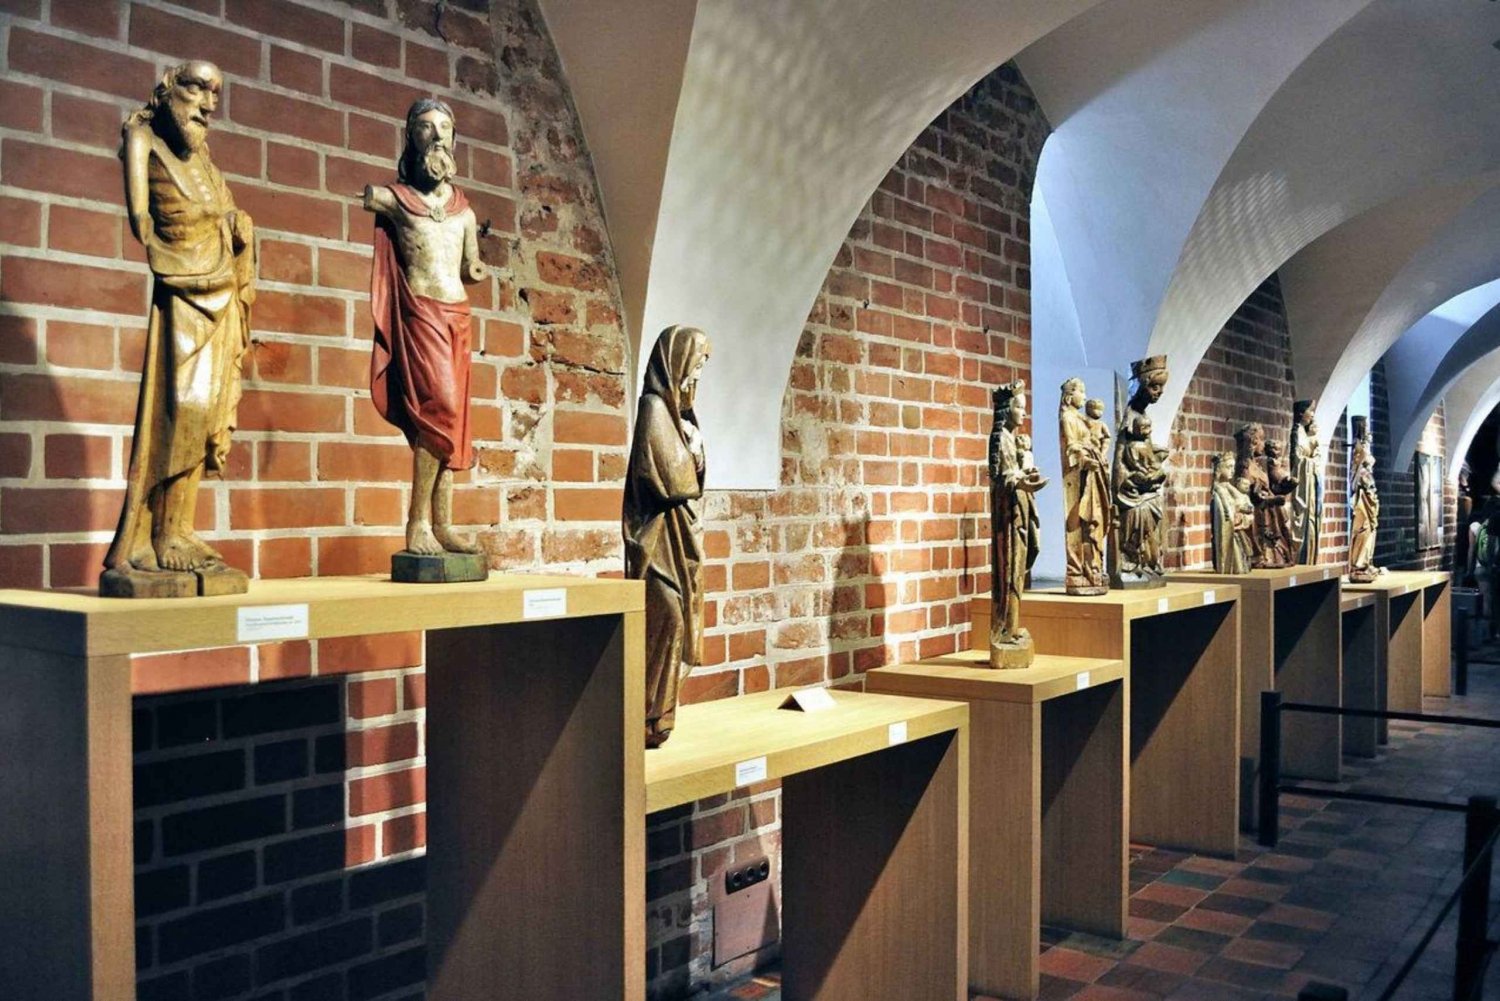 From Gdansk: Malbork Castle Trip with Ticket and Audio Guide